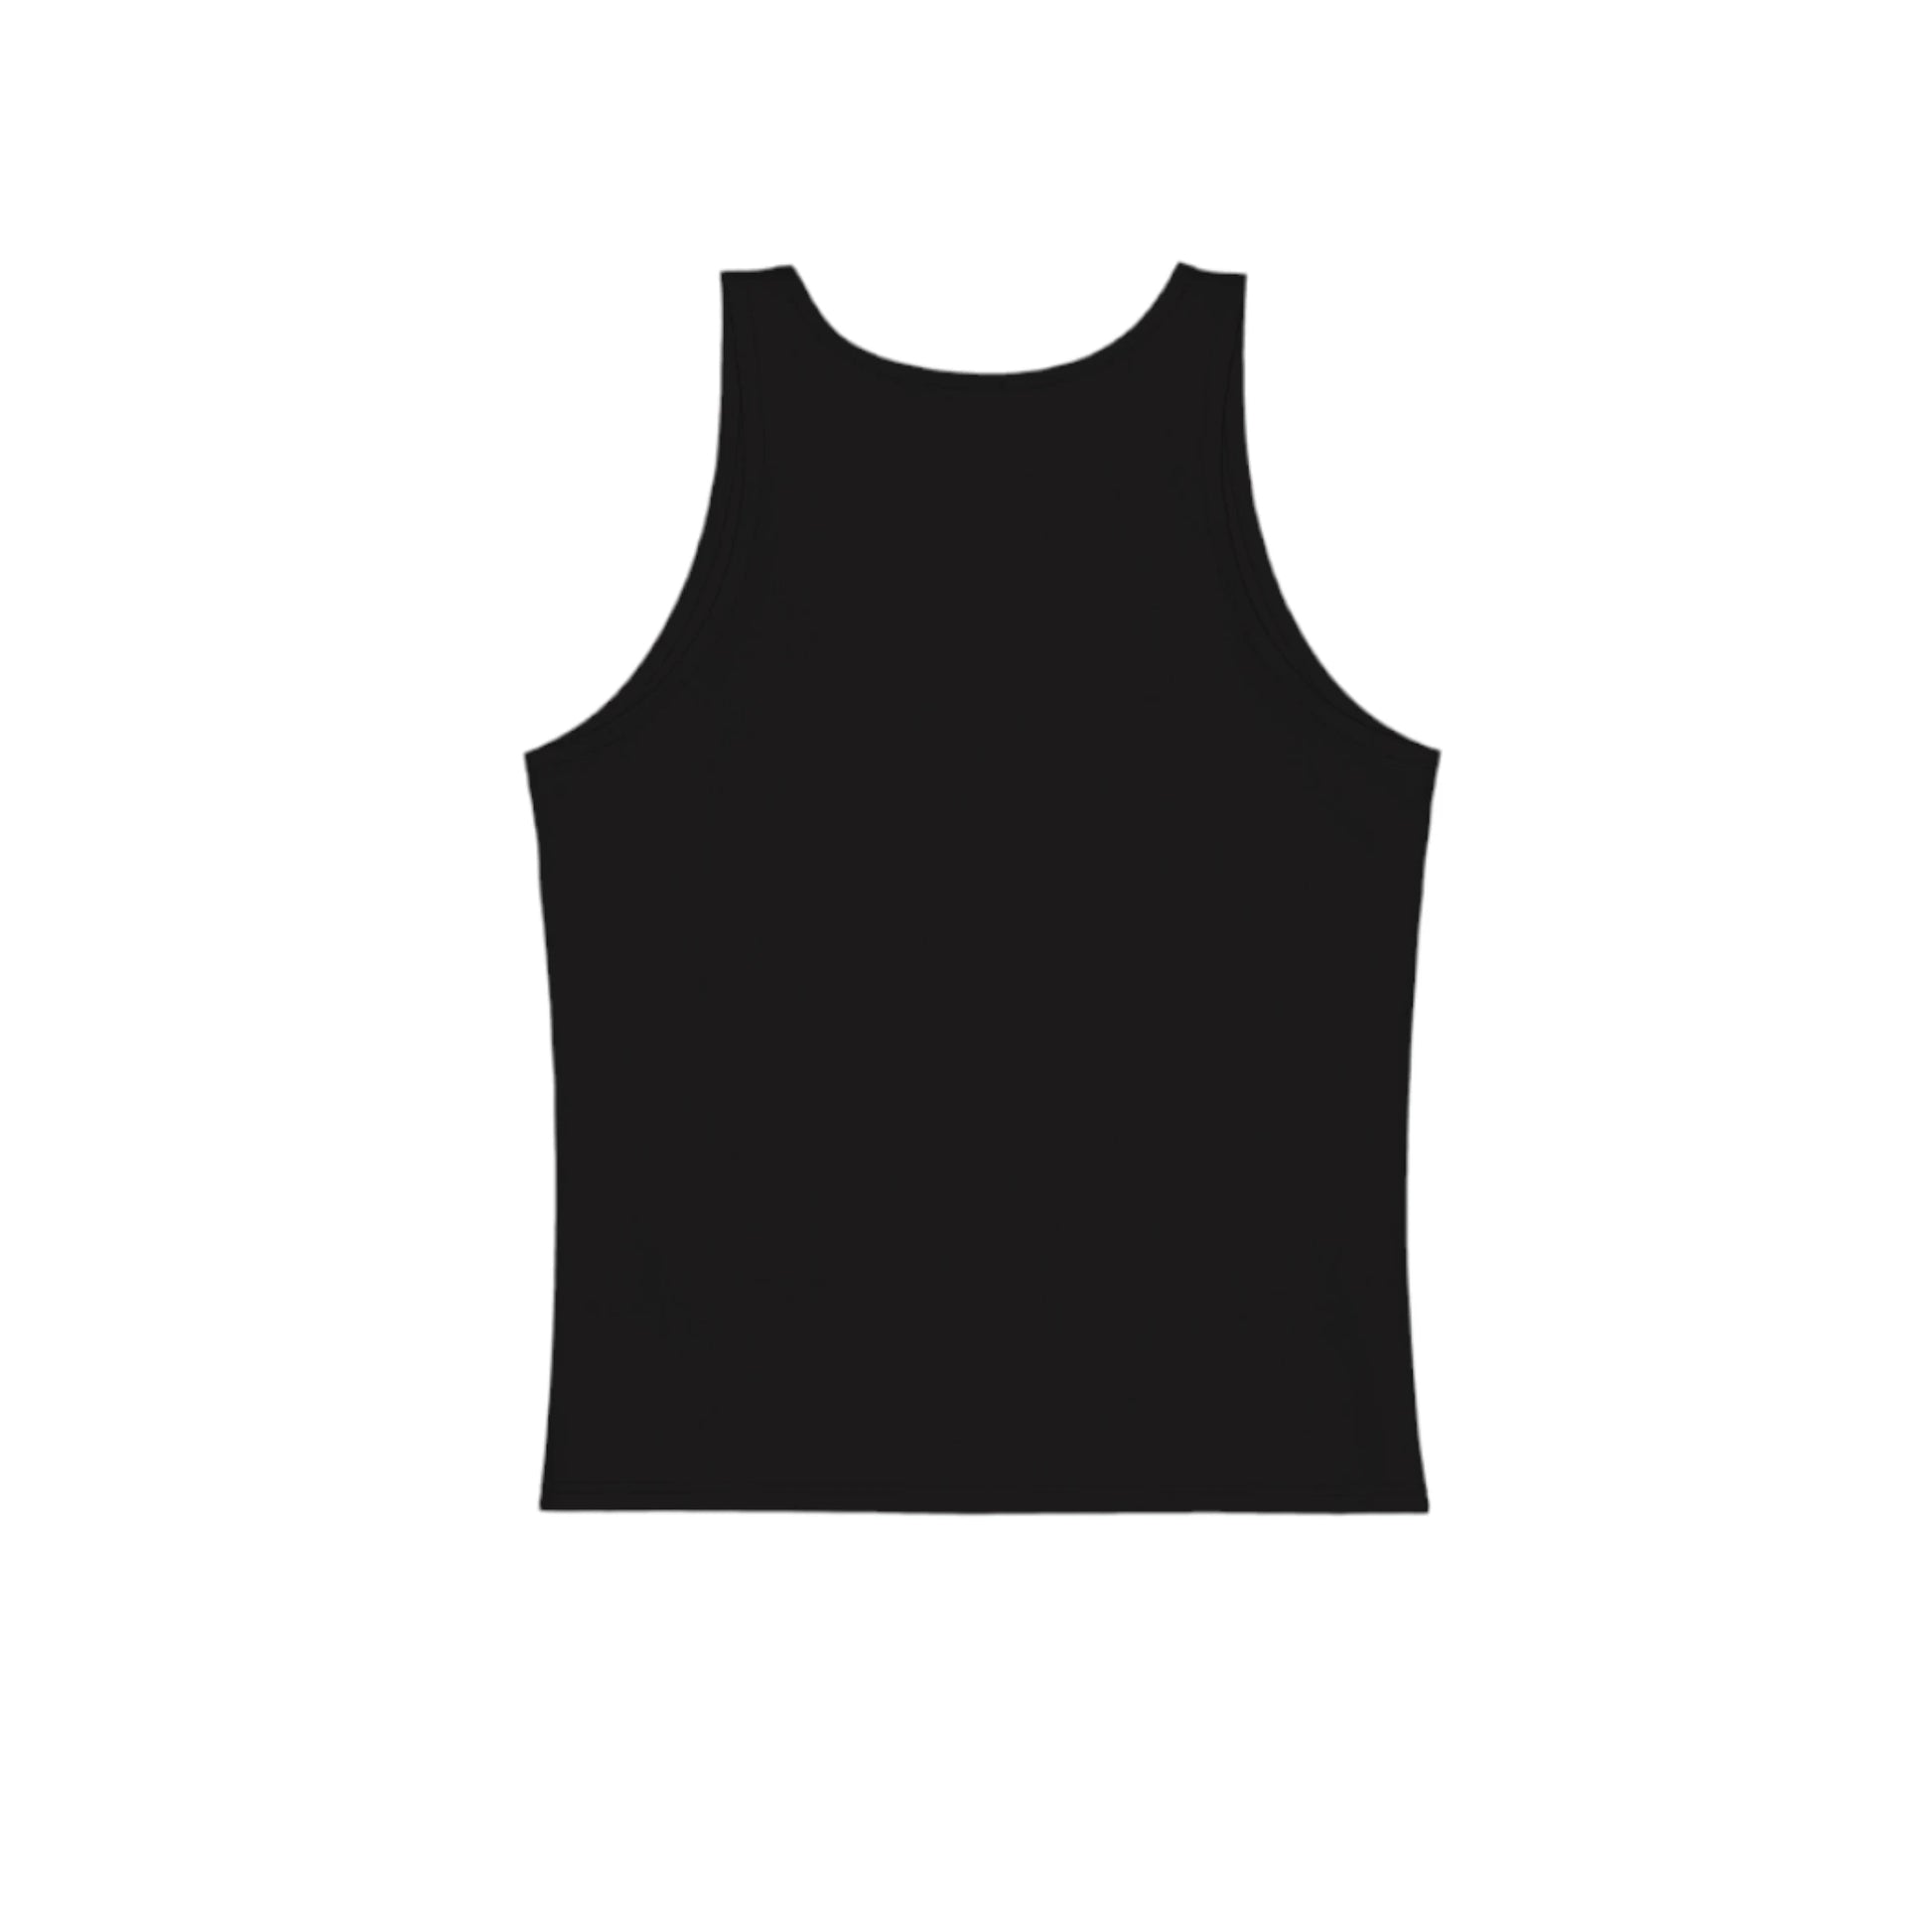 The back of the black unisex tank top.